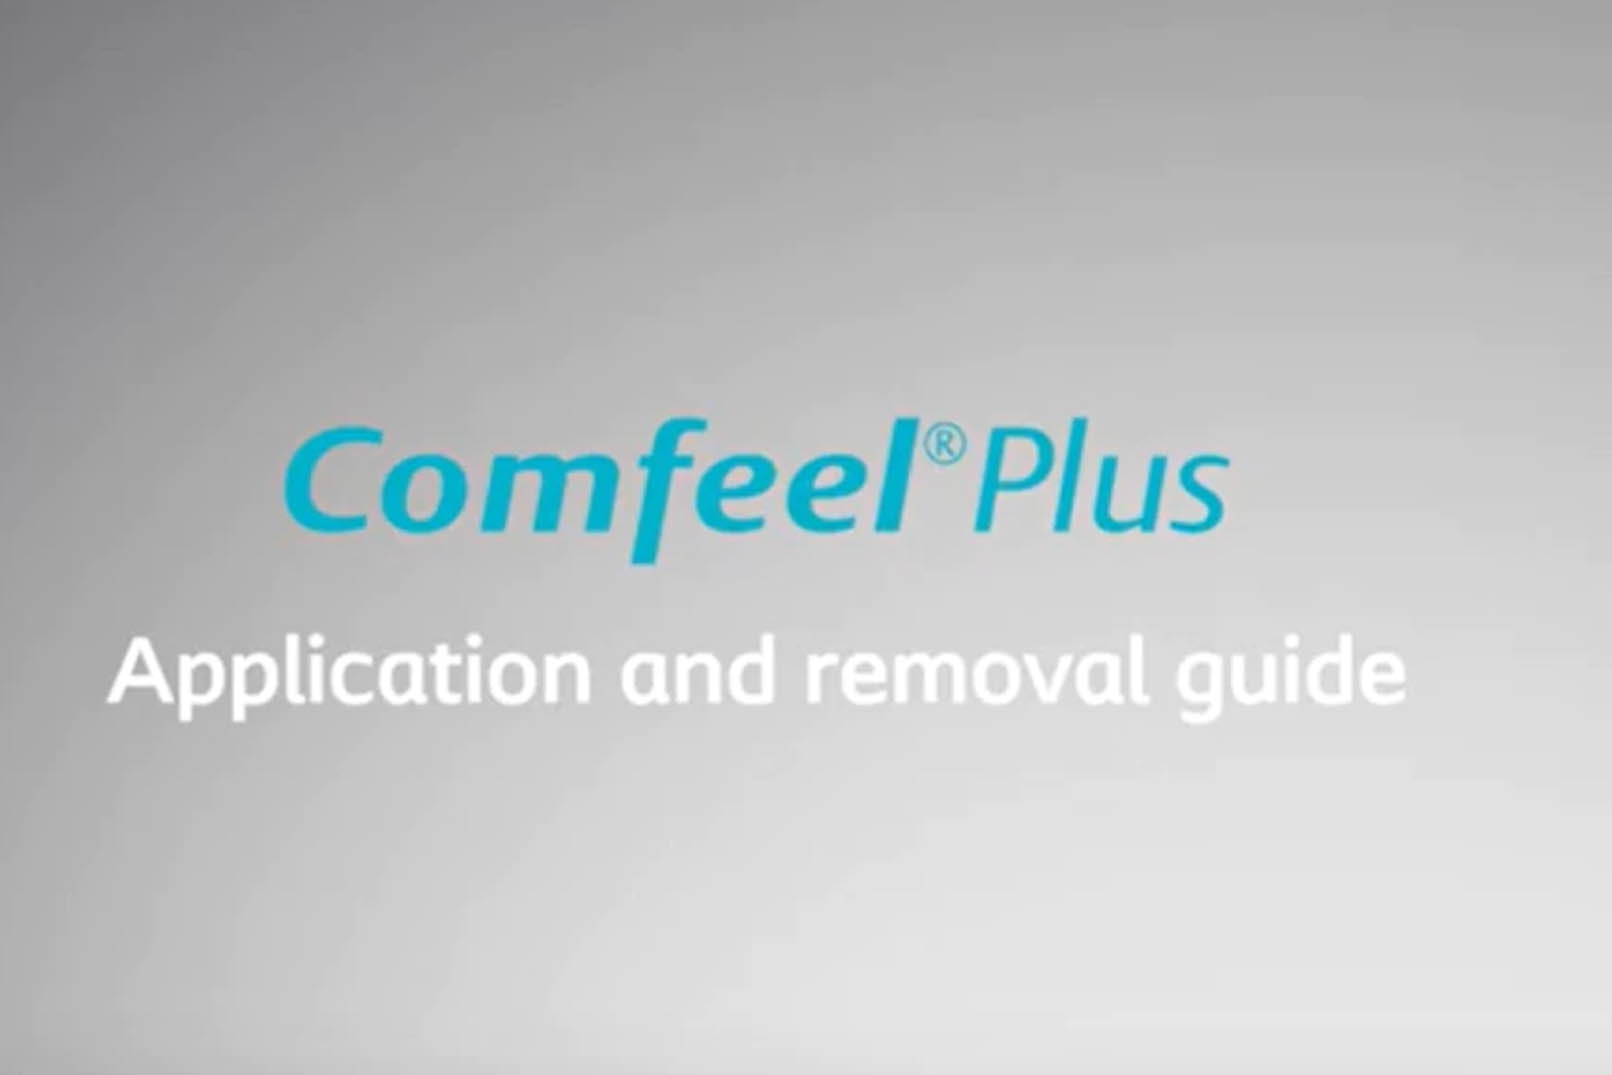 How to apply and remove Comfeel